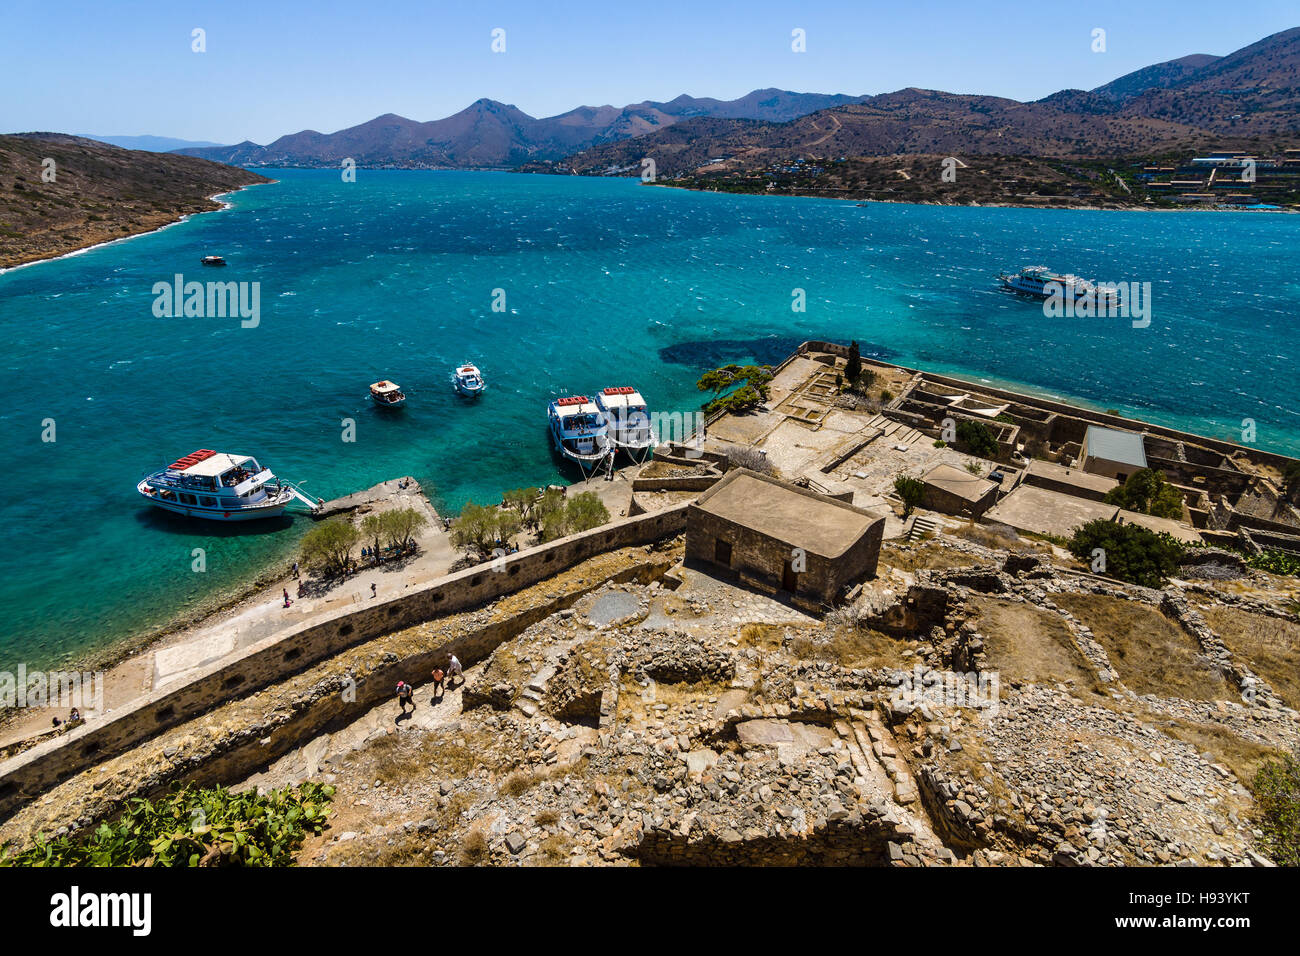 CRETE, GREECE - JULY 11, 2016: View of the Gulf of Elounda from a fortress on Spinalonga island. Stock Photo